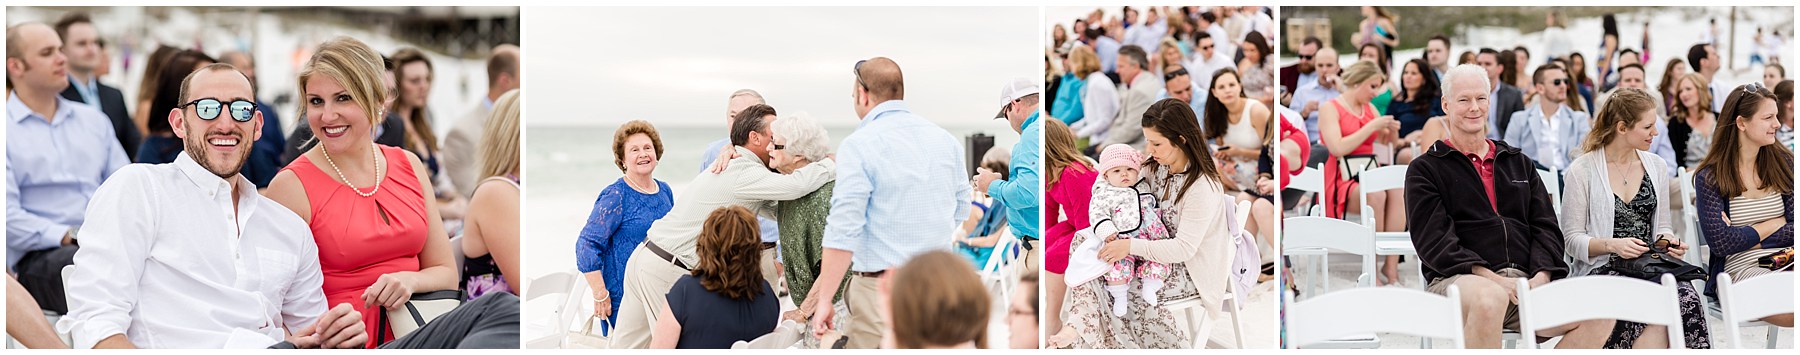 Wedding Ceremony guests on the beach in Destin, FL